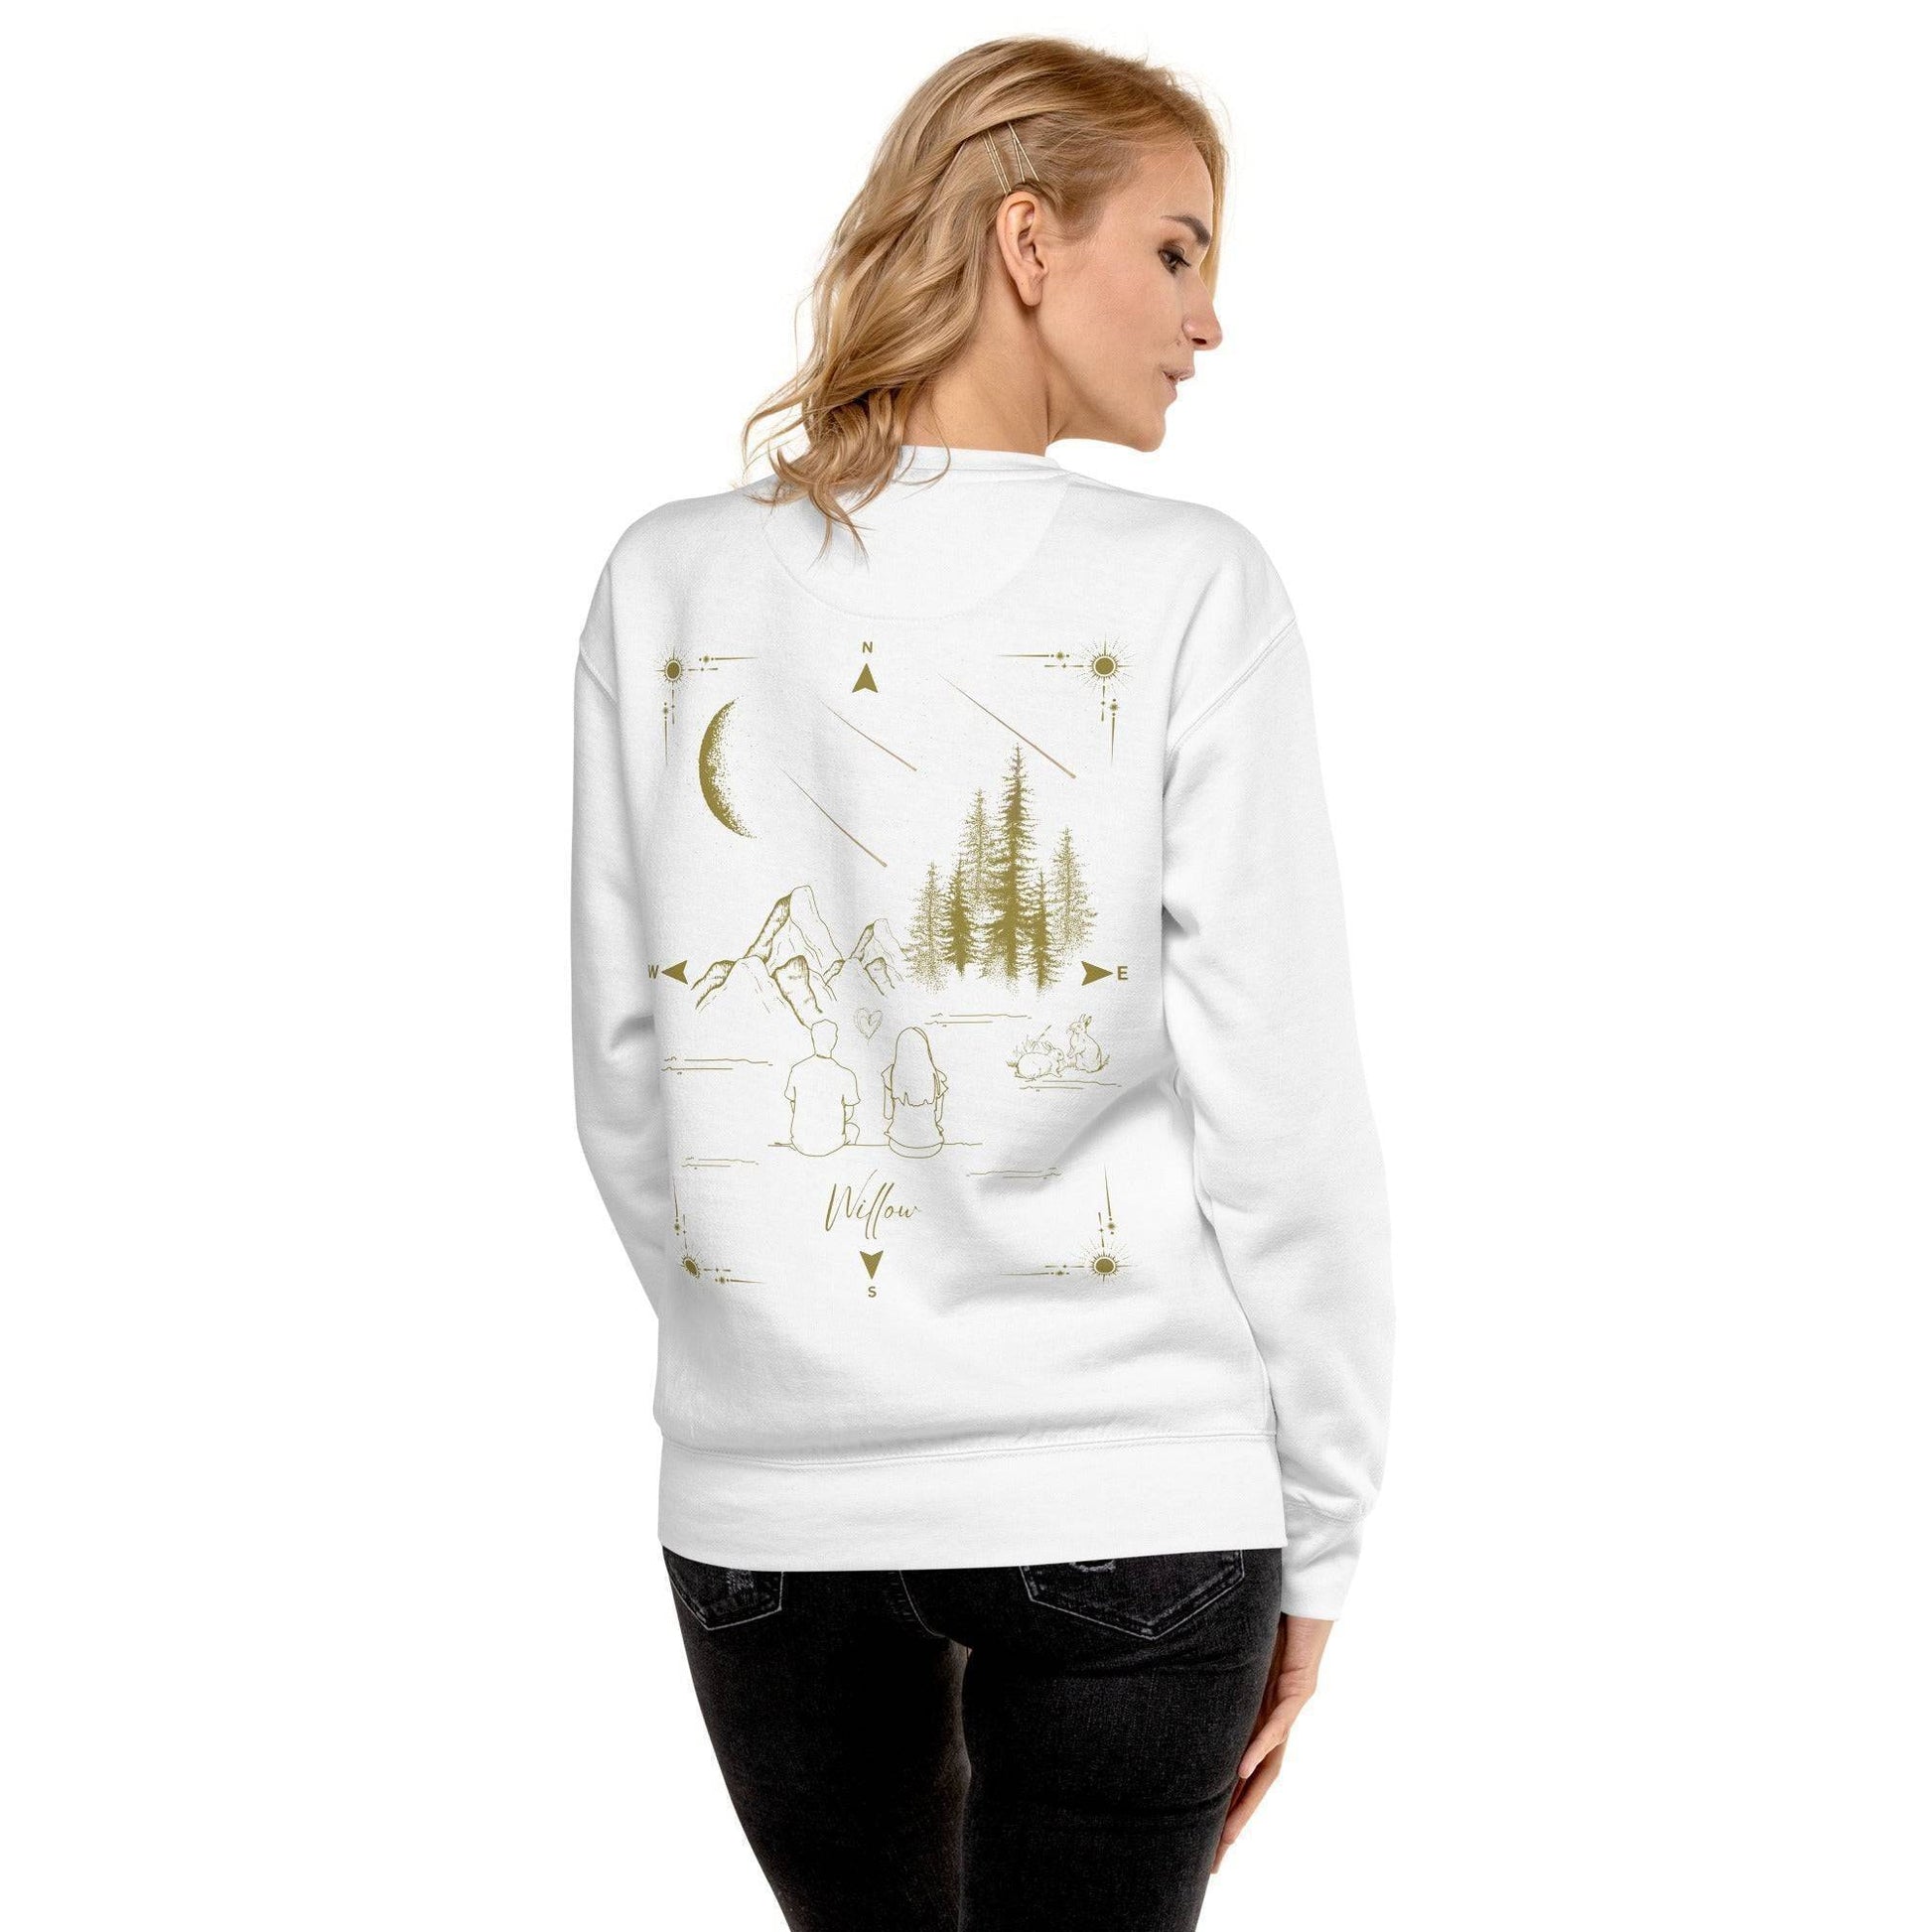 Taylor Swift Willow Embroidered Sweatshirt